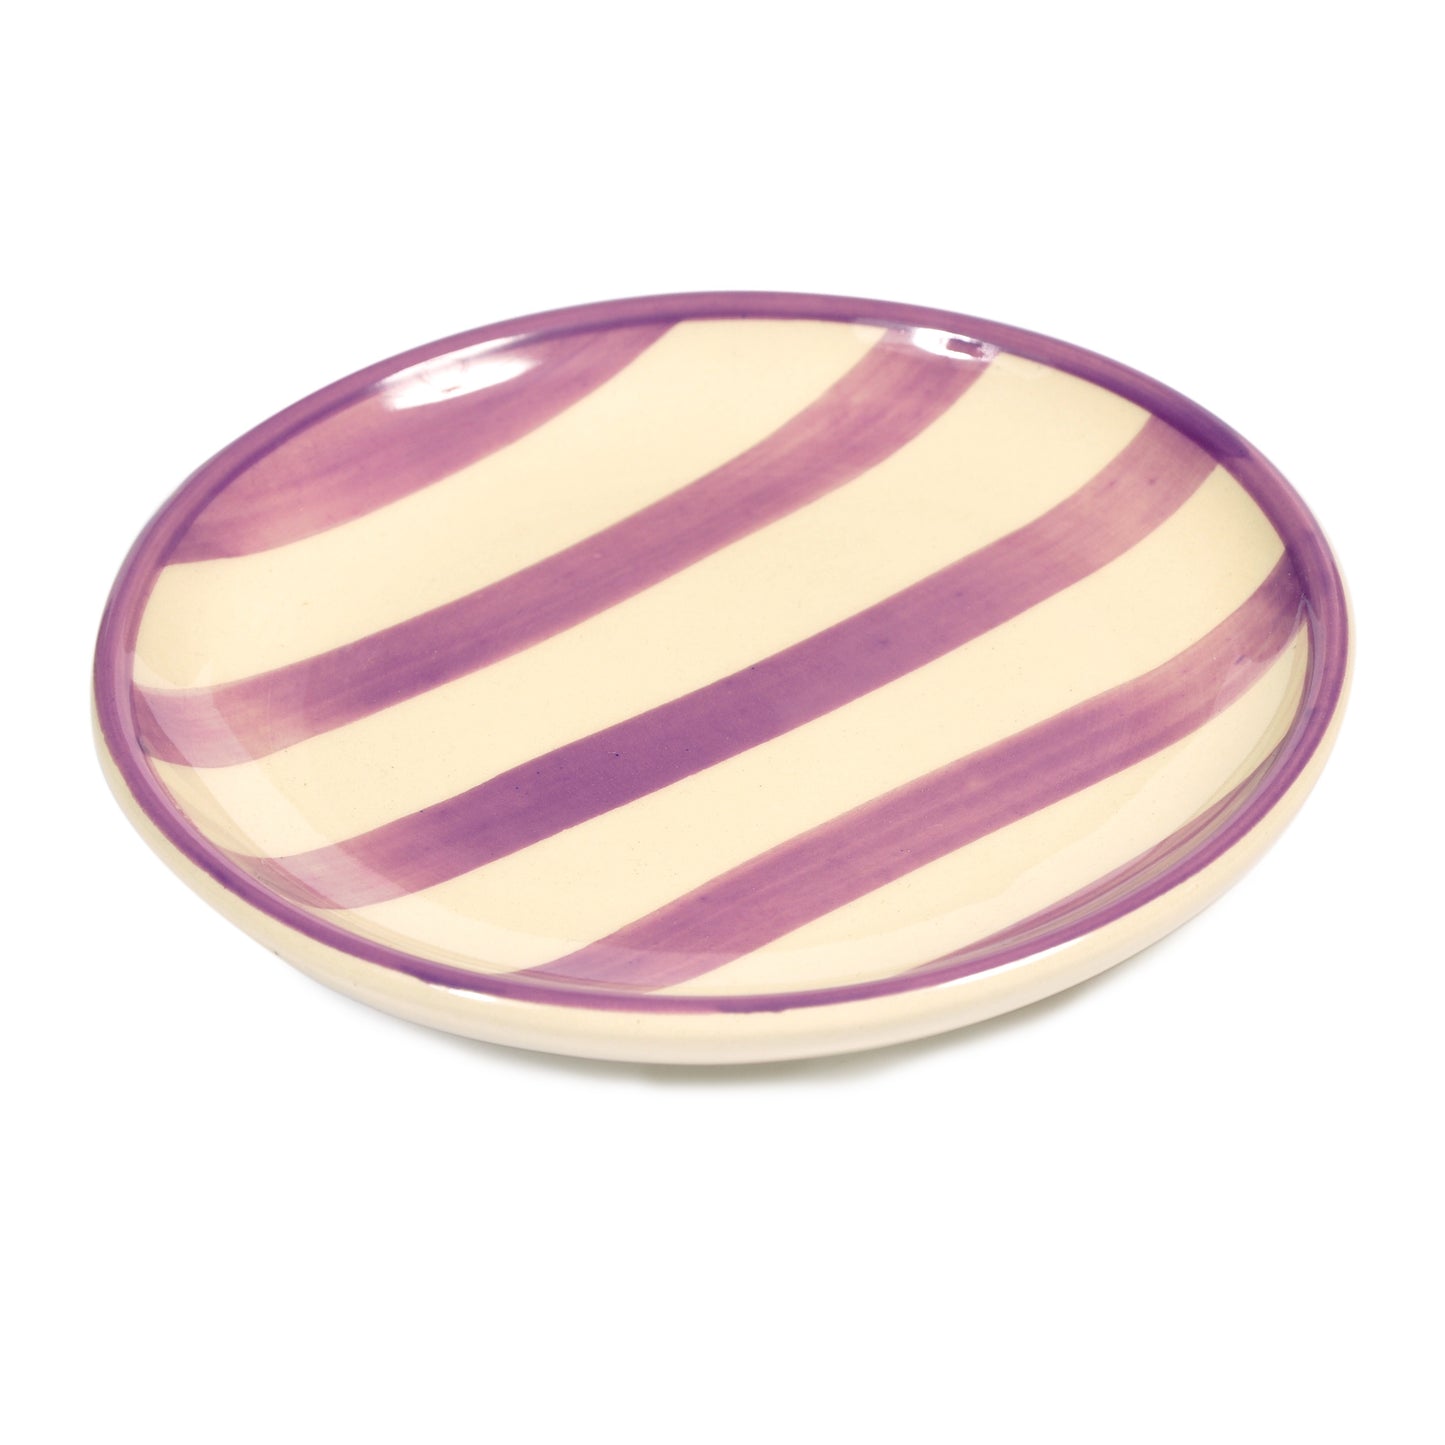 Lavender Striped Porcelain Mini Plate Not specified